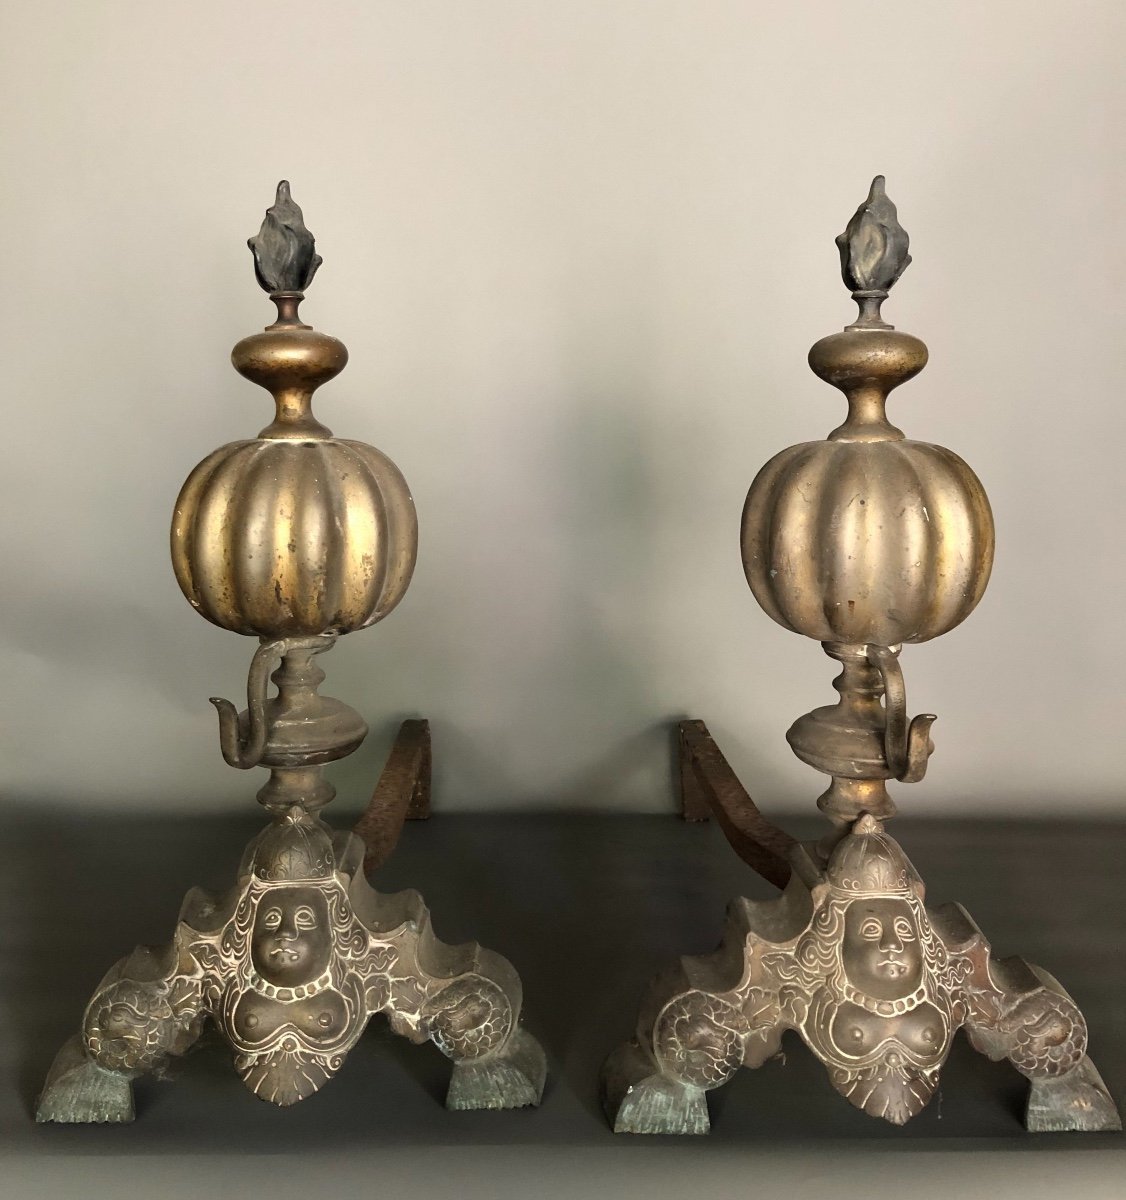 Pair Of Andirons With Marmosets - Louis XIII Style - Iron And Bronze